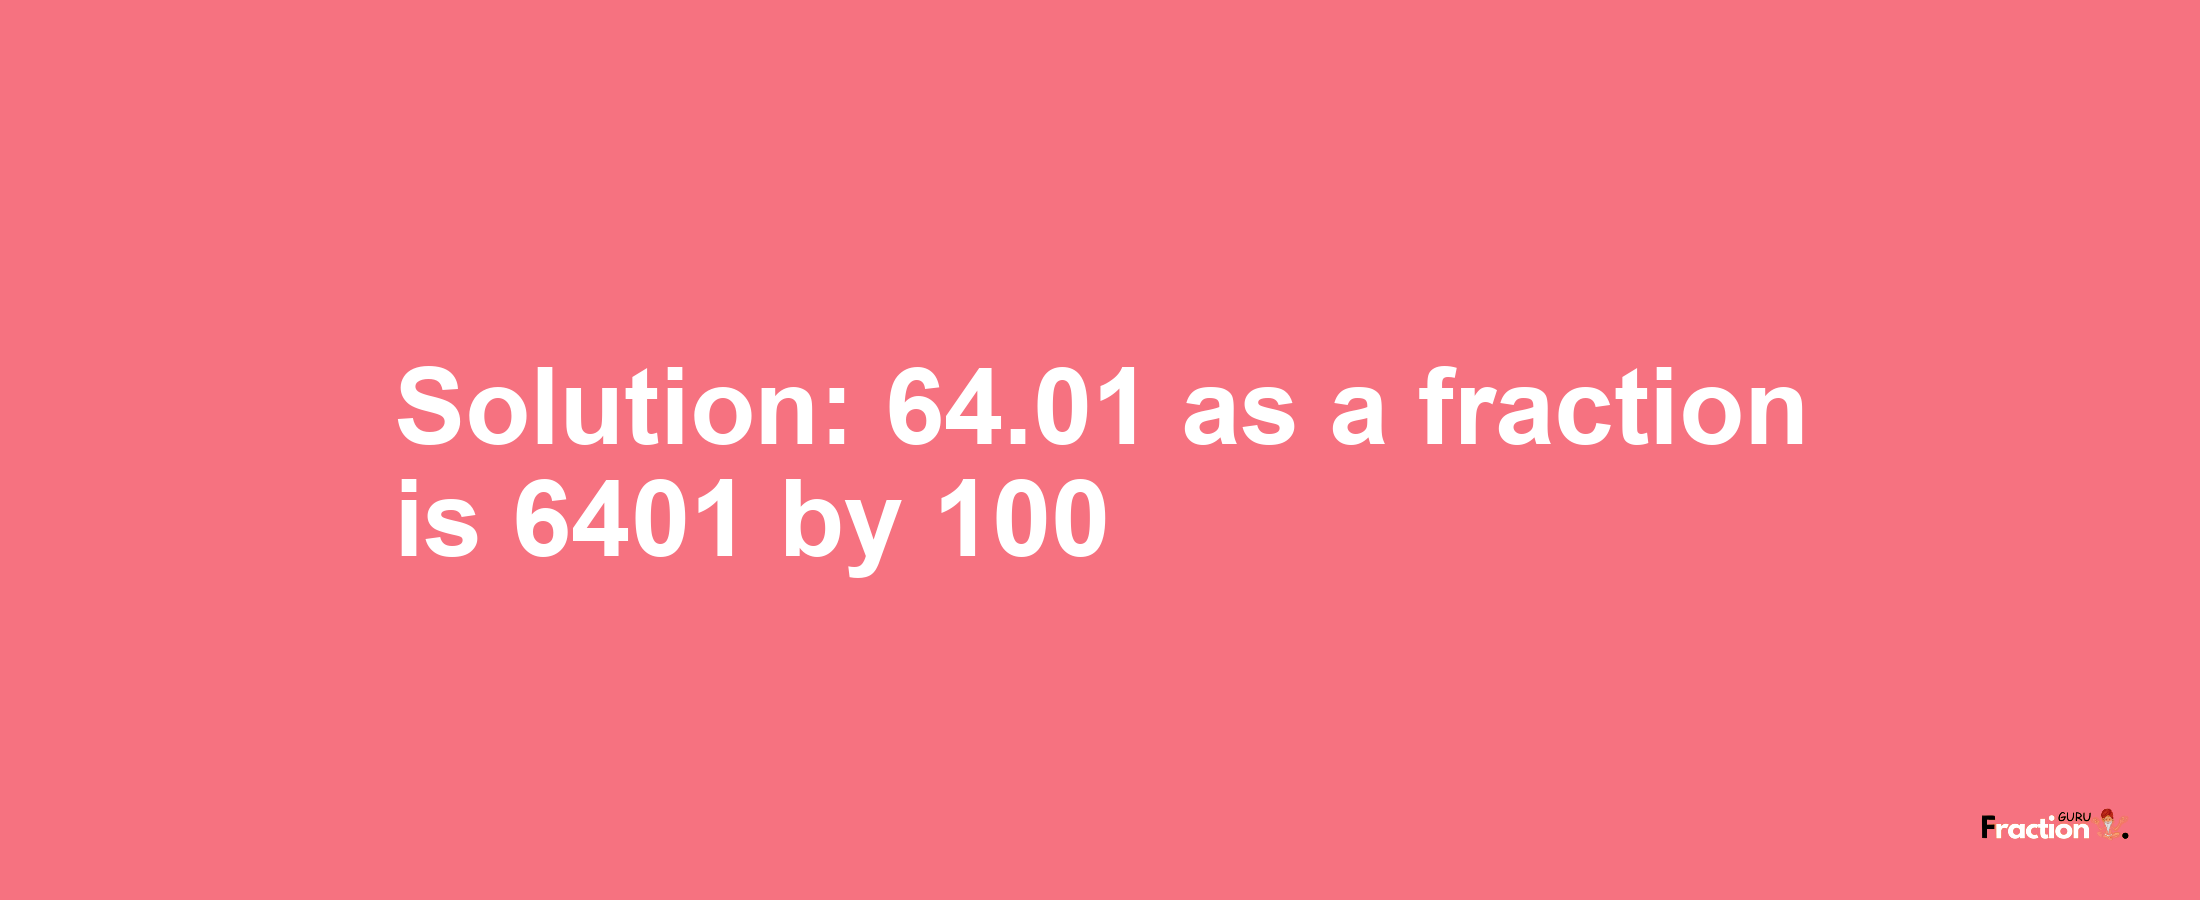 Solution:64.01 as a fraction is 6401/100